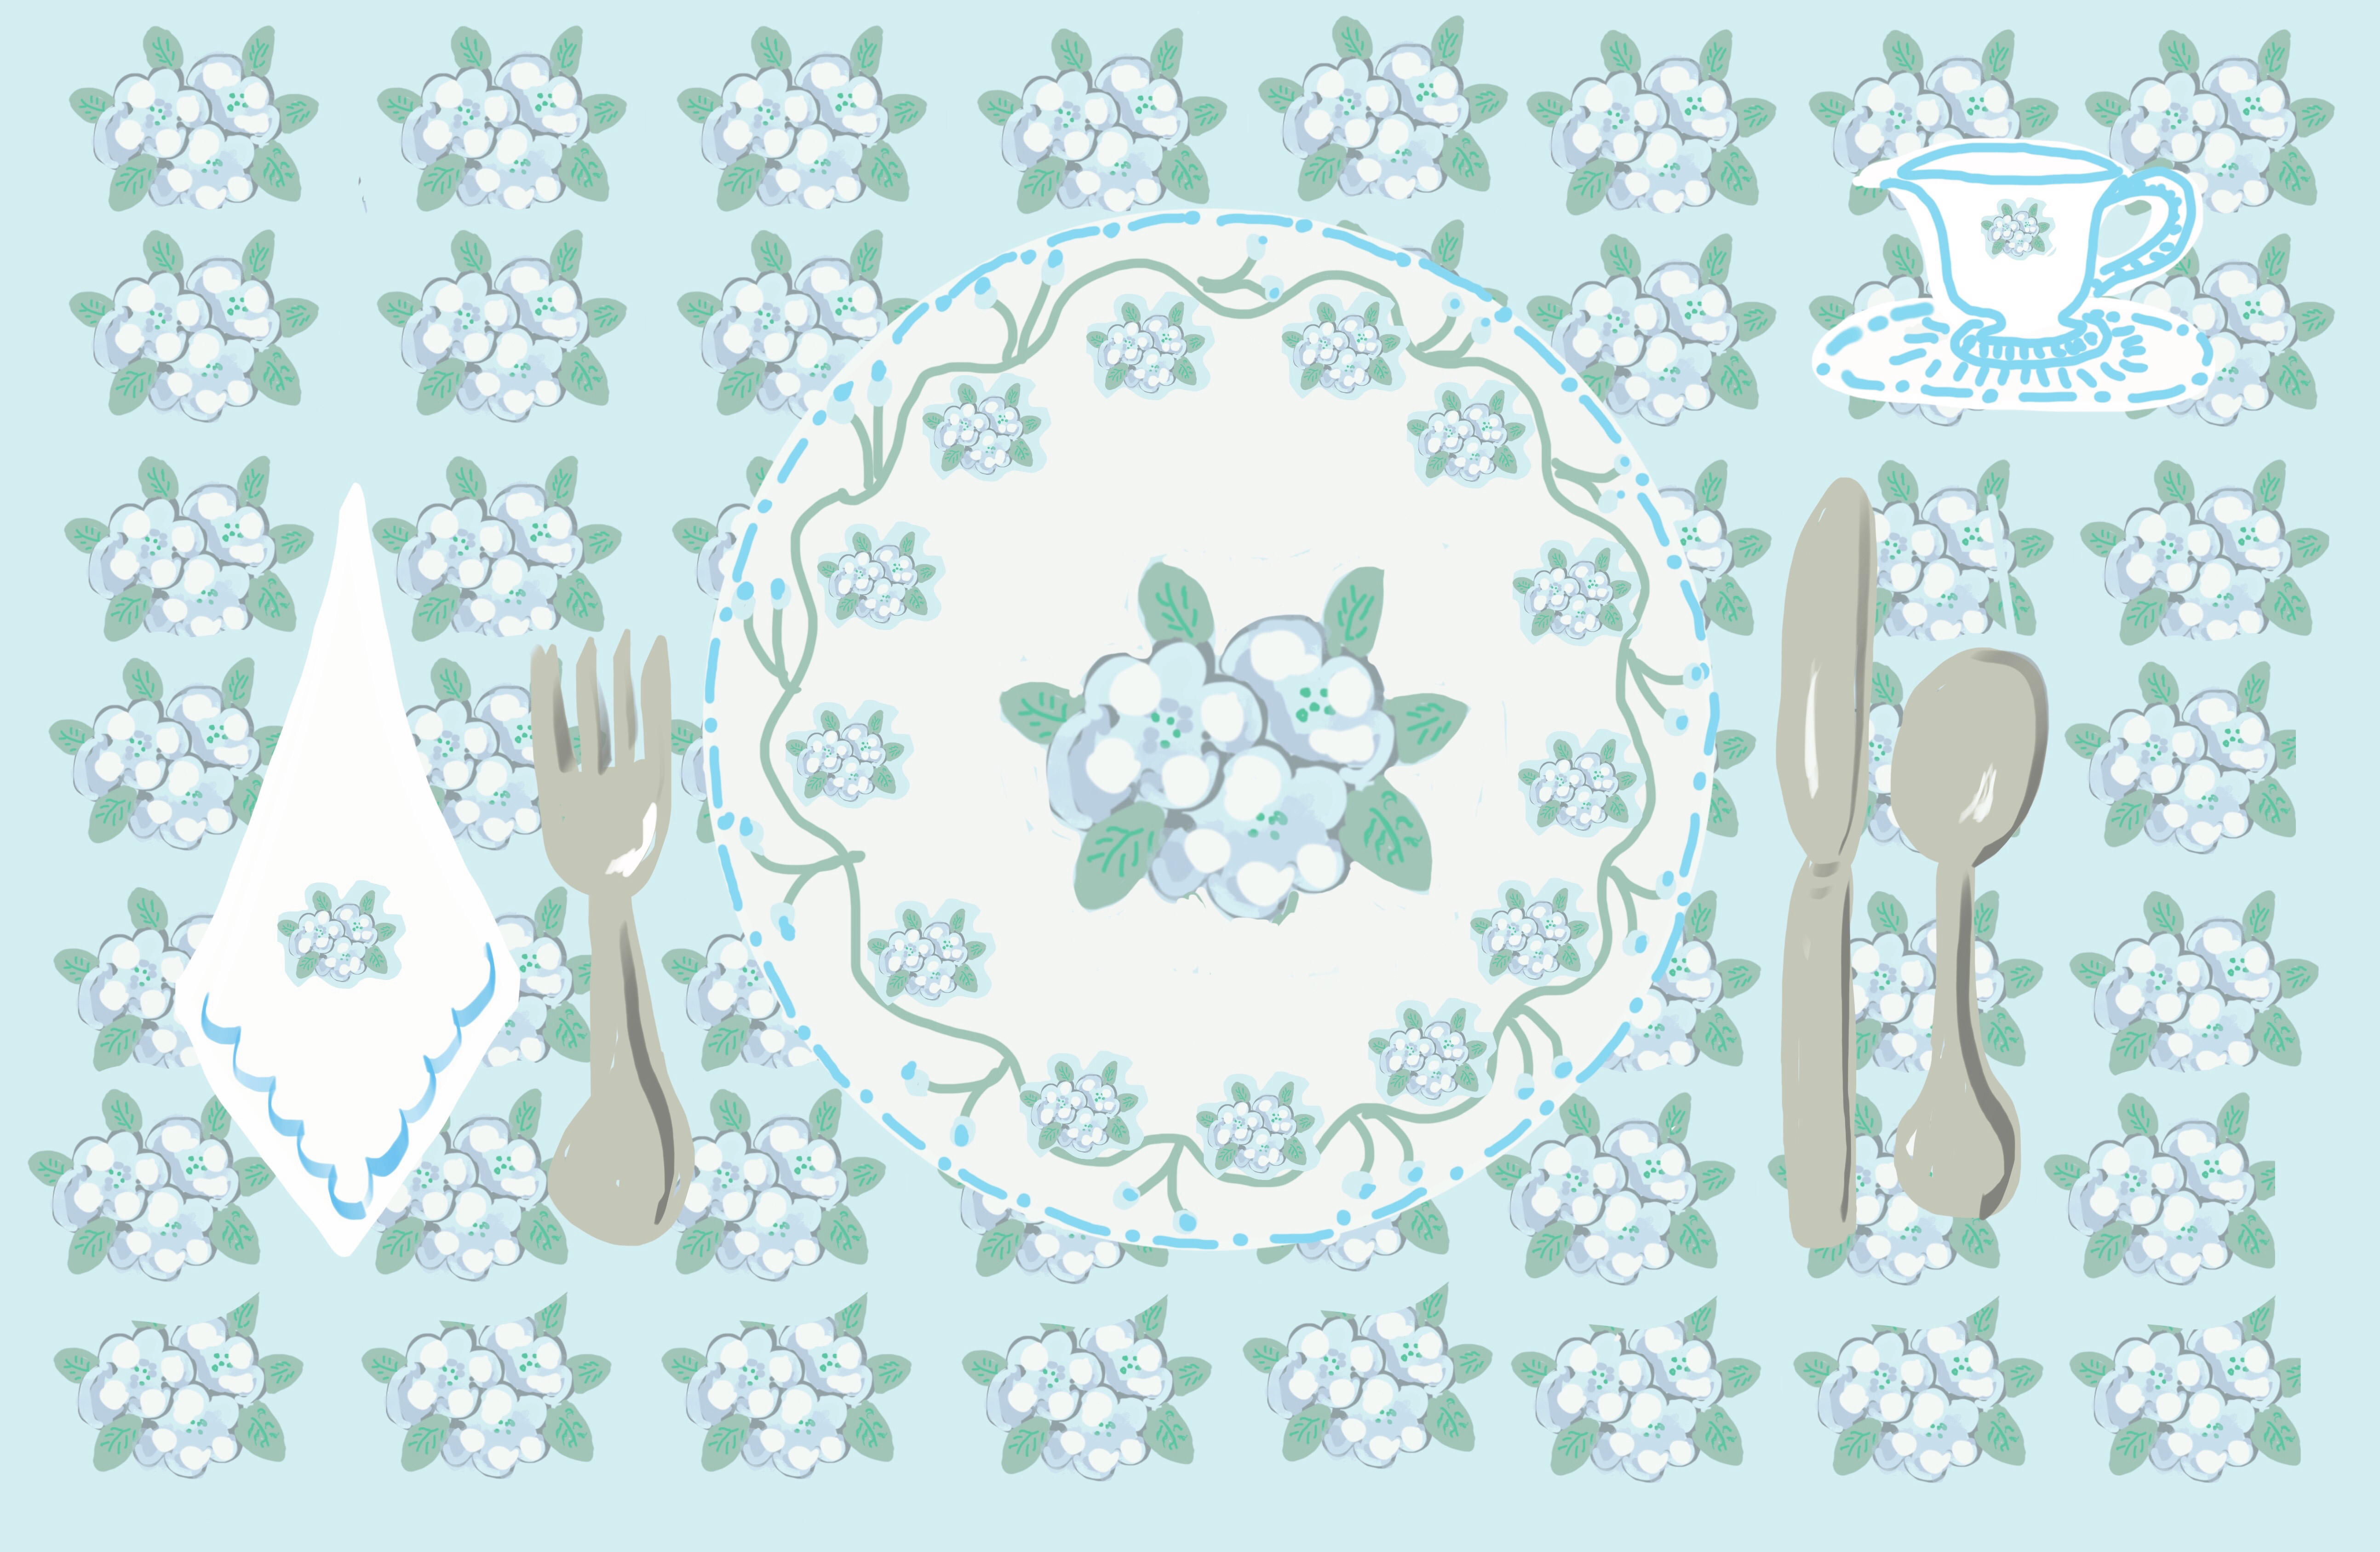 Laminated Placemat - Hydrangea Print (Collaboration with Born on Fifth)